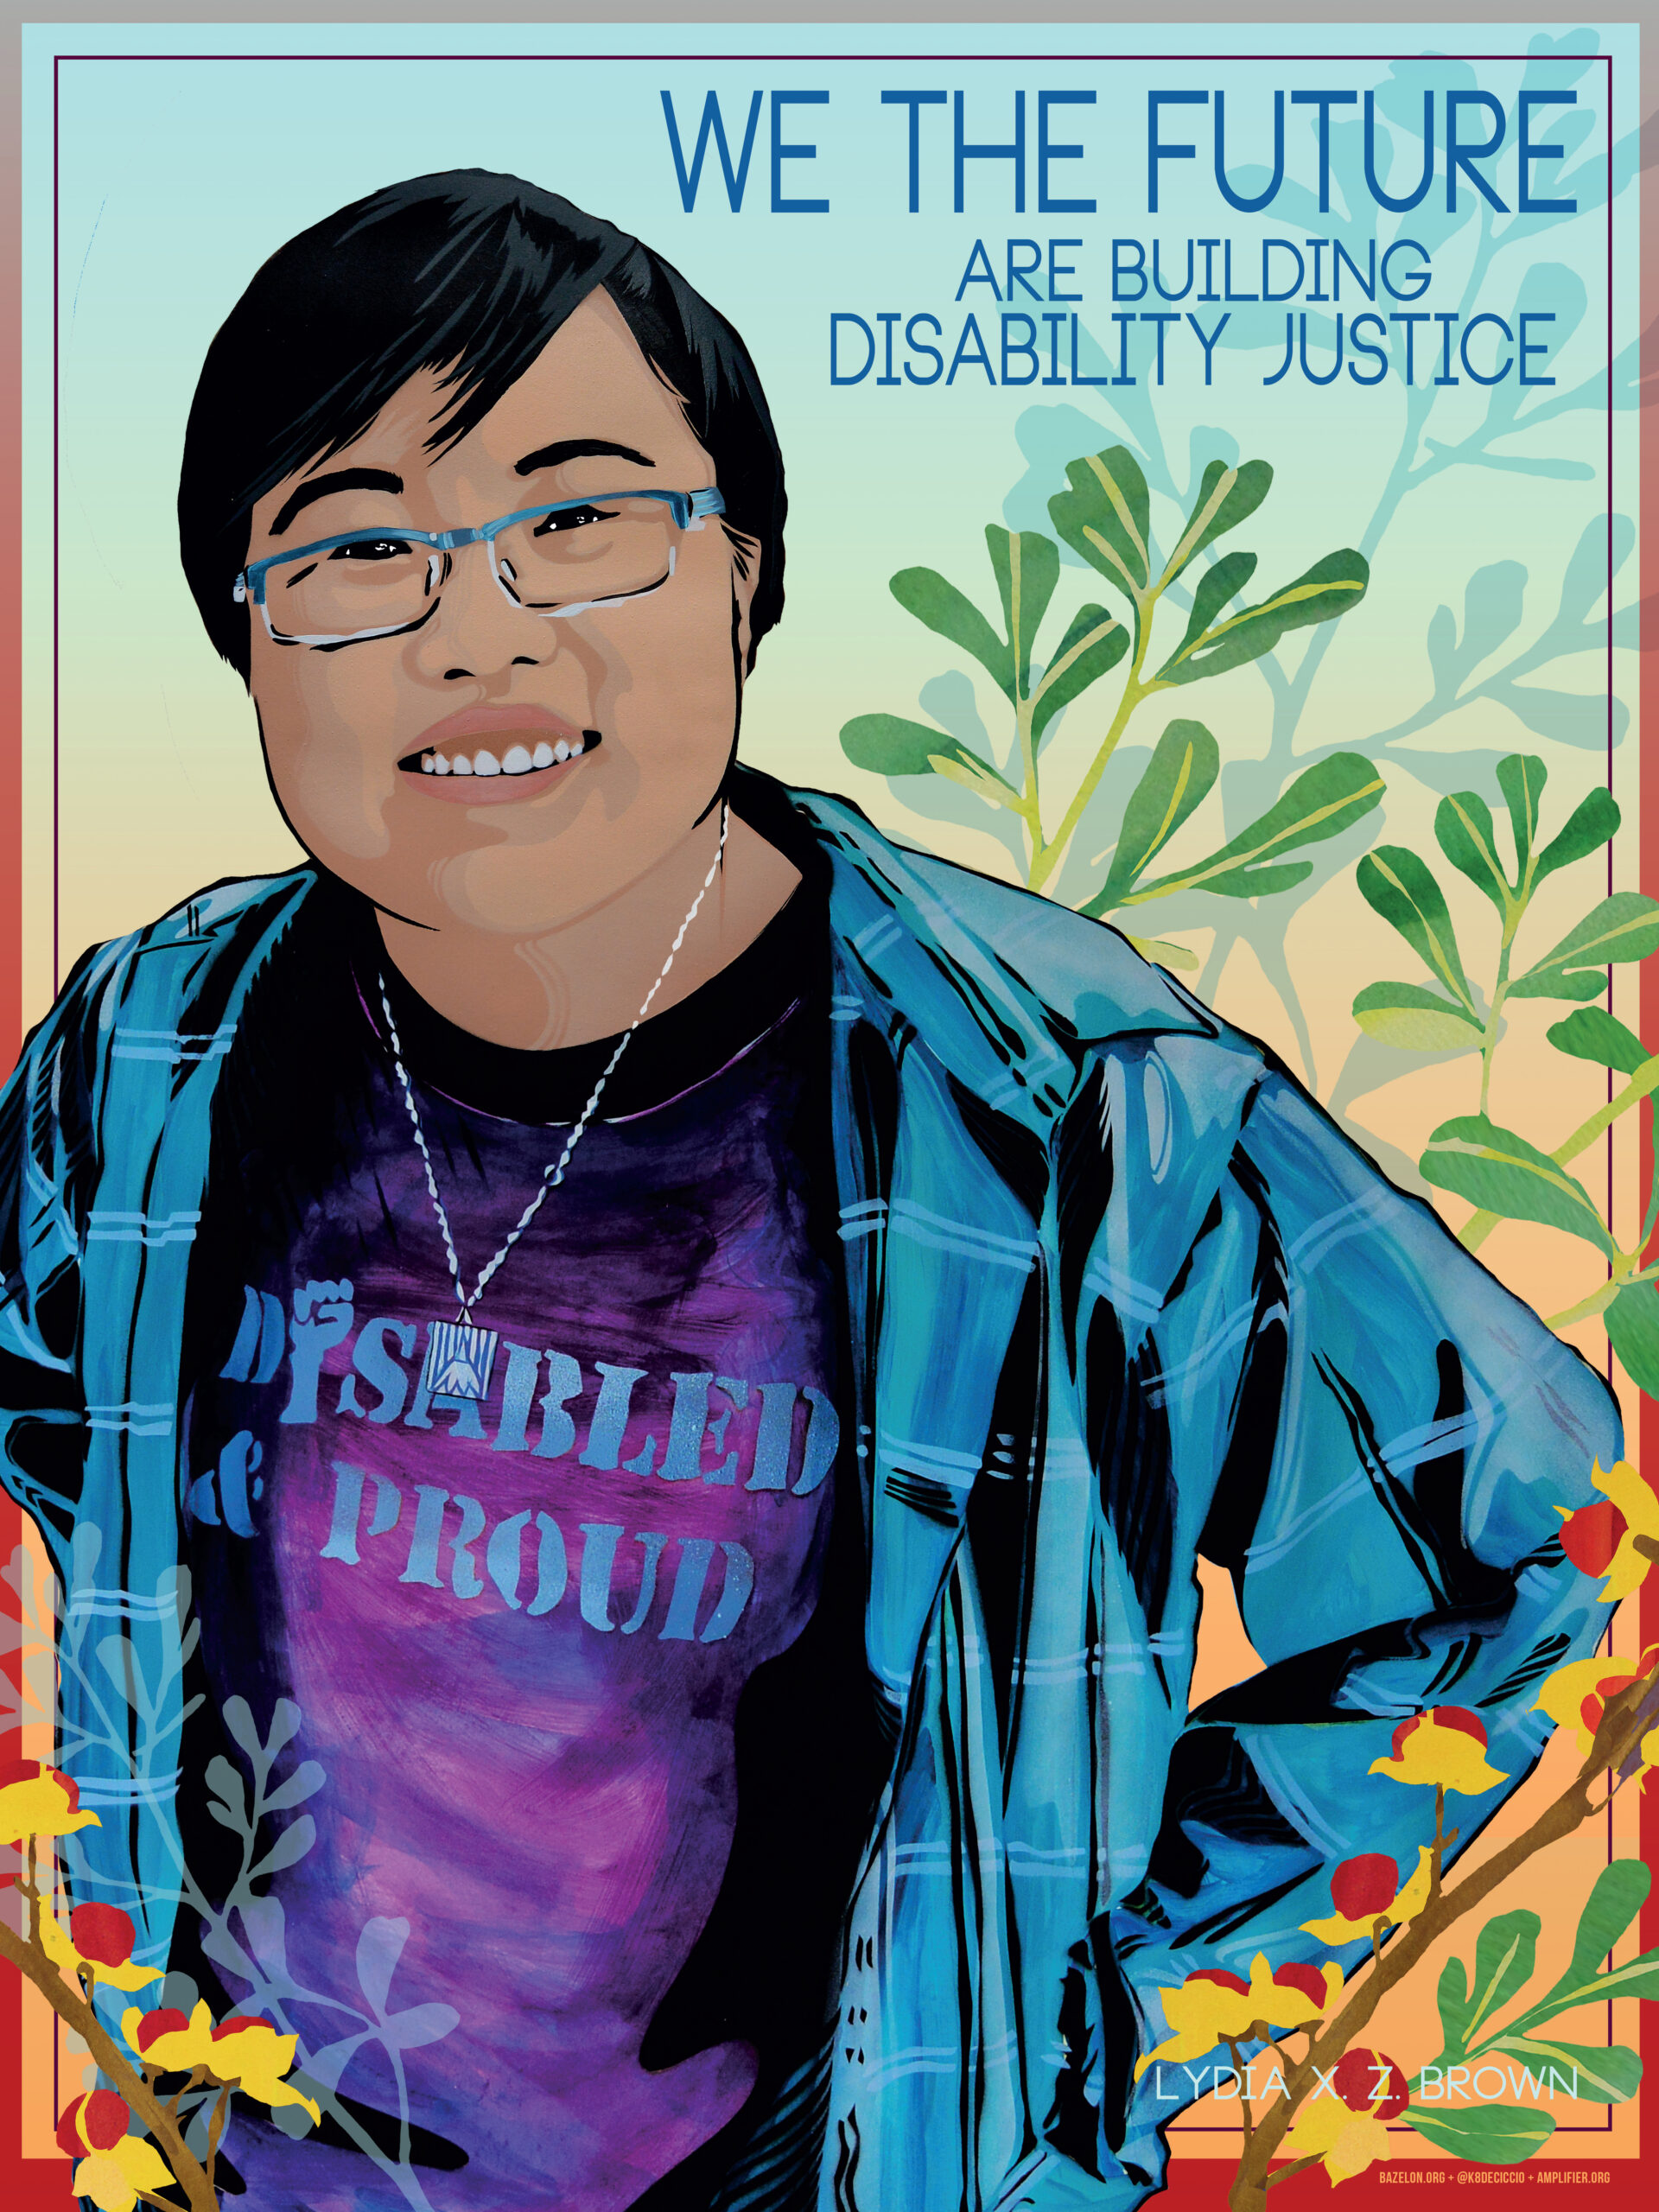 Activist LydiaXZBrown, with short hair and glasses, smiles, hands to hips, words on purple t-shirt showing under her plaid shirt say "Disabled and Proud"  